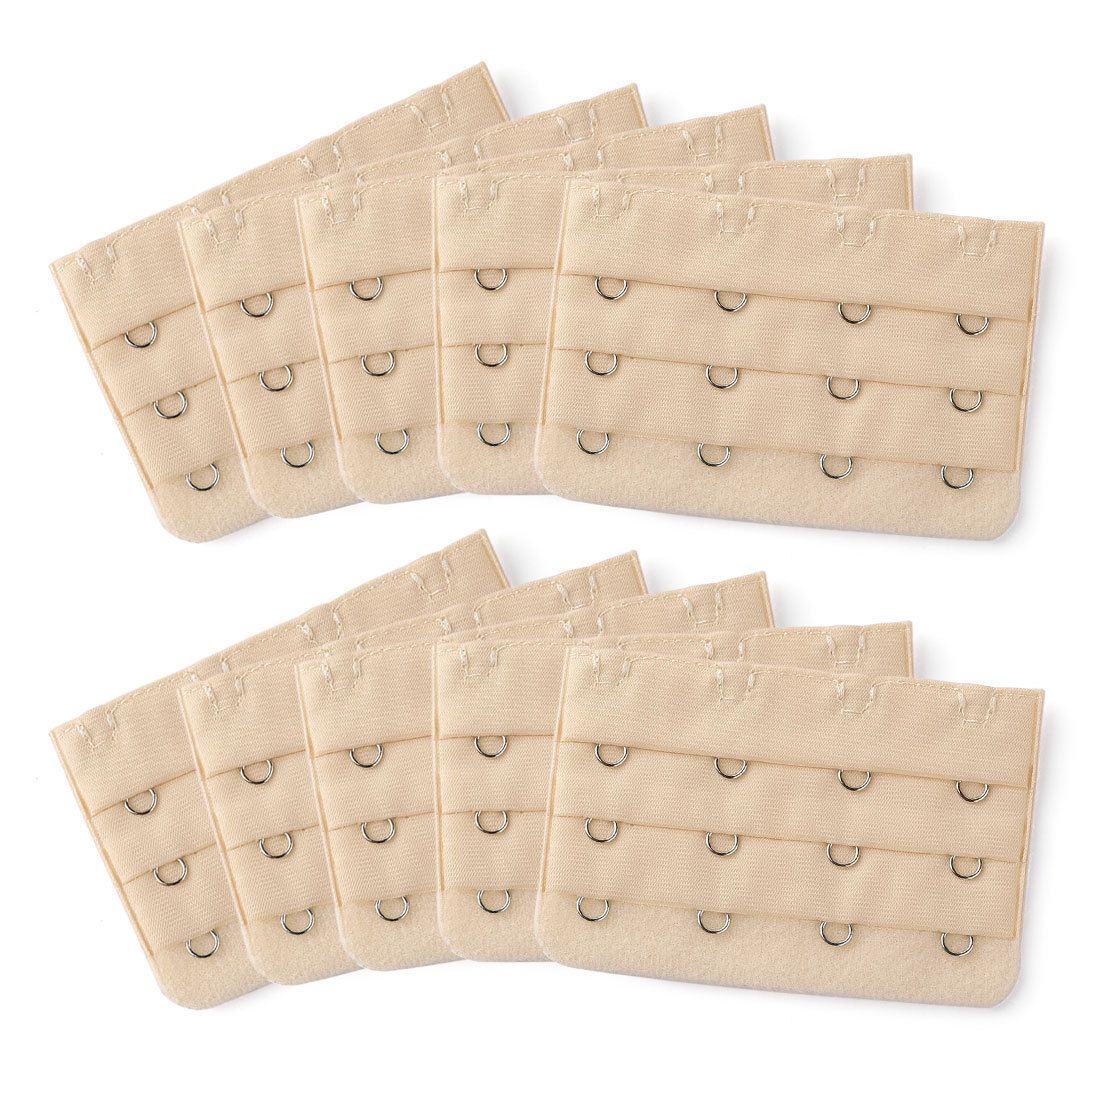 BRA EXTENDERS — The Industry Supply Store